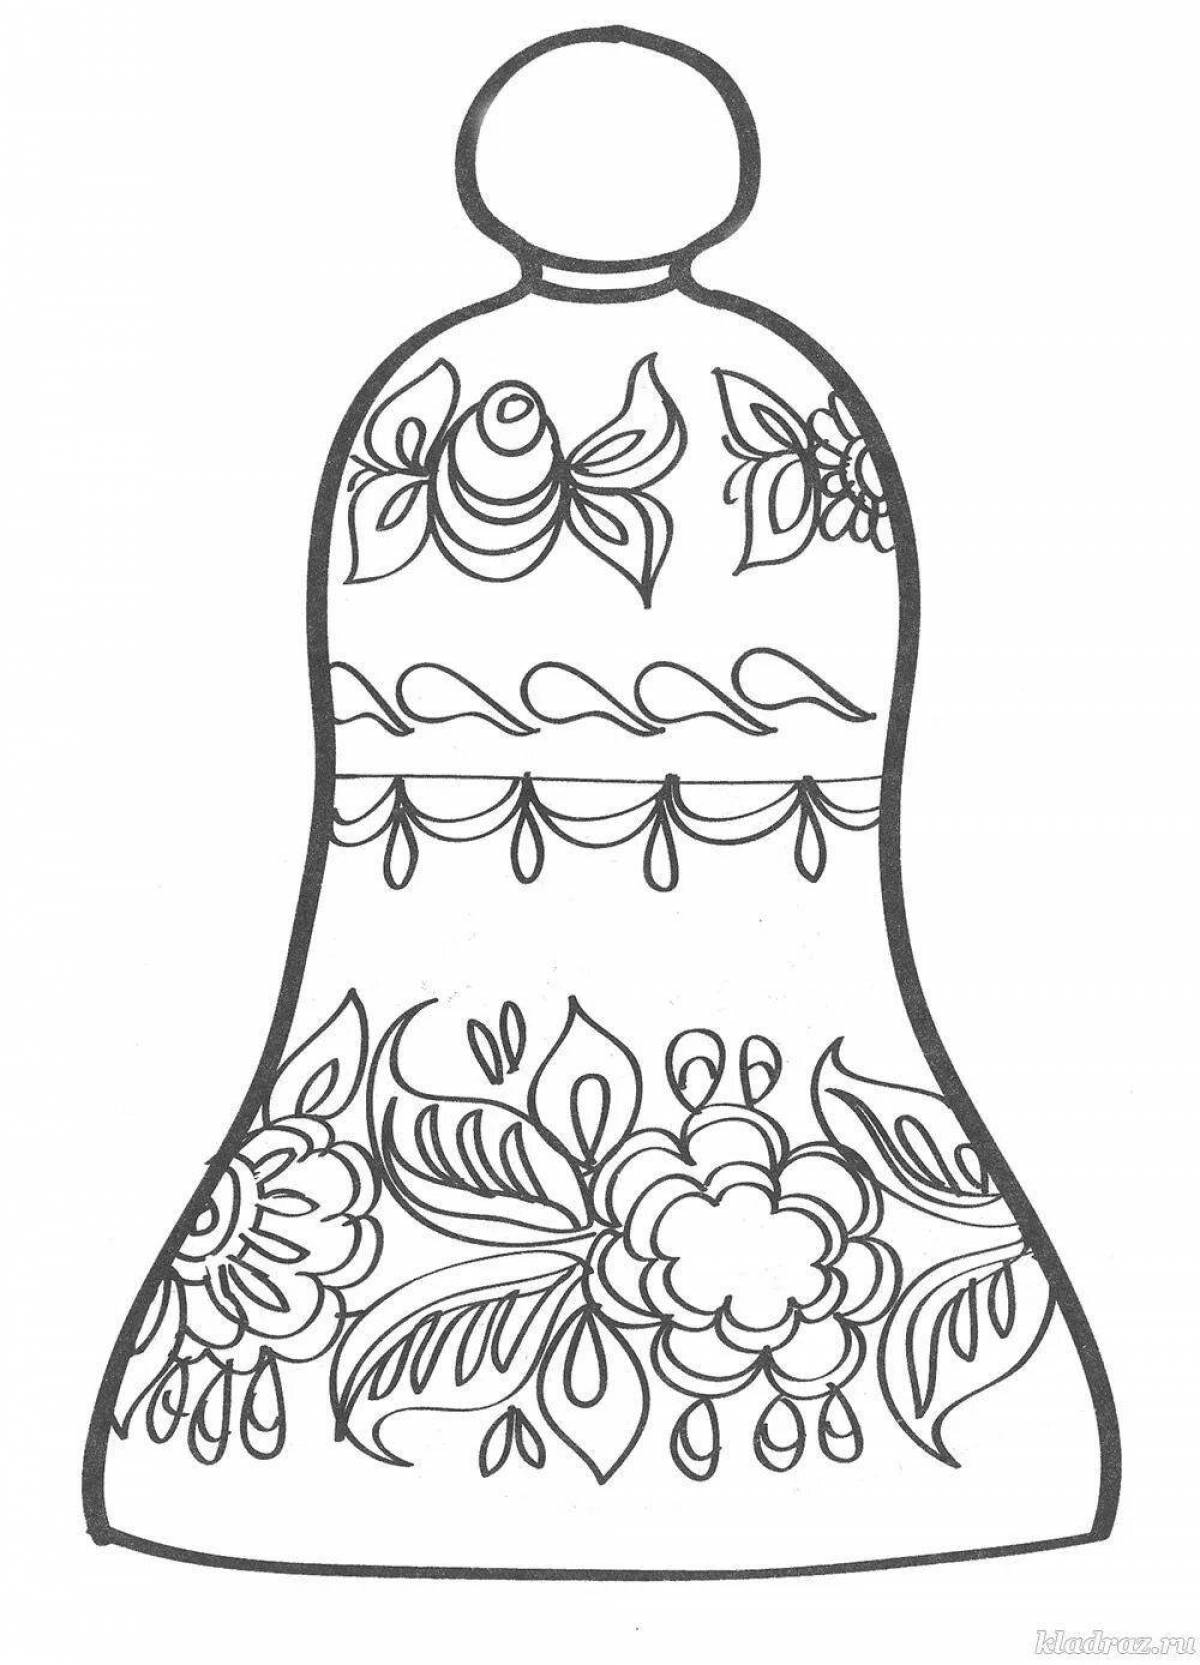 Coloring plate with Gorodets ornament